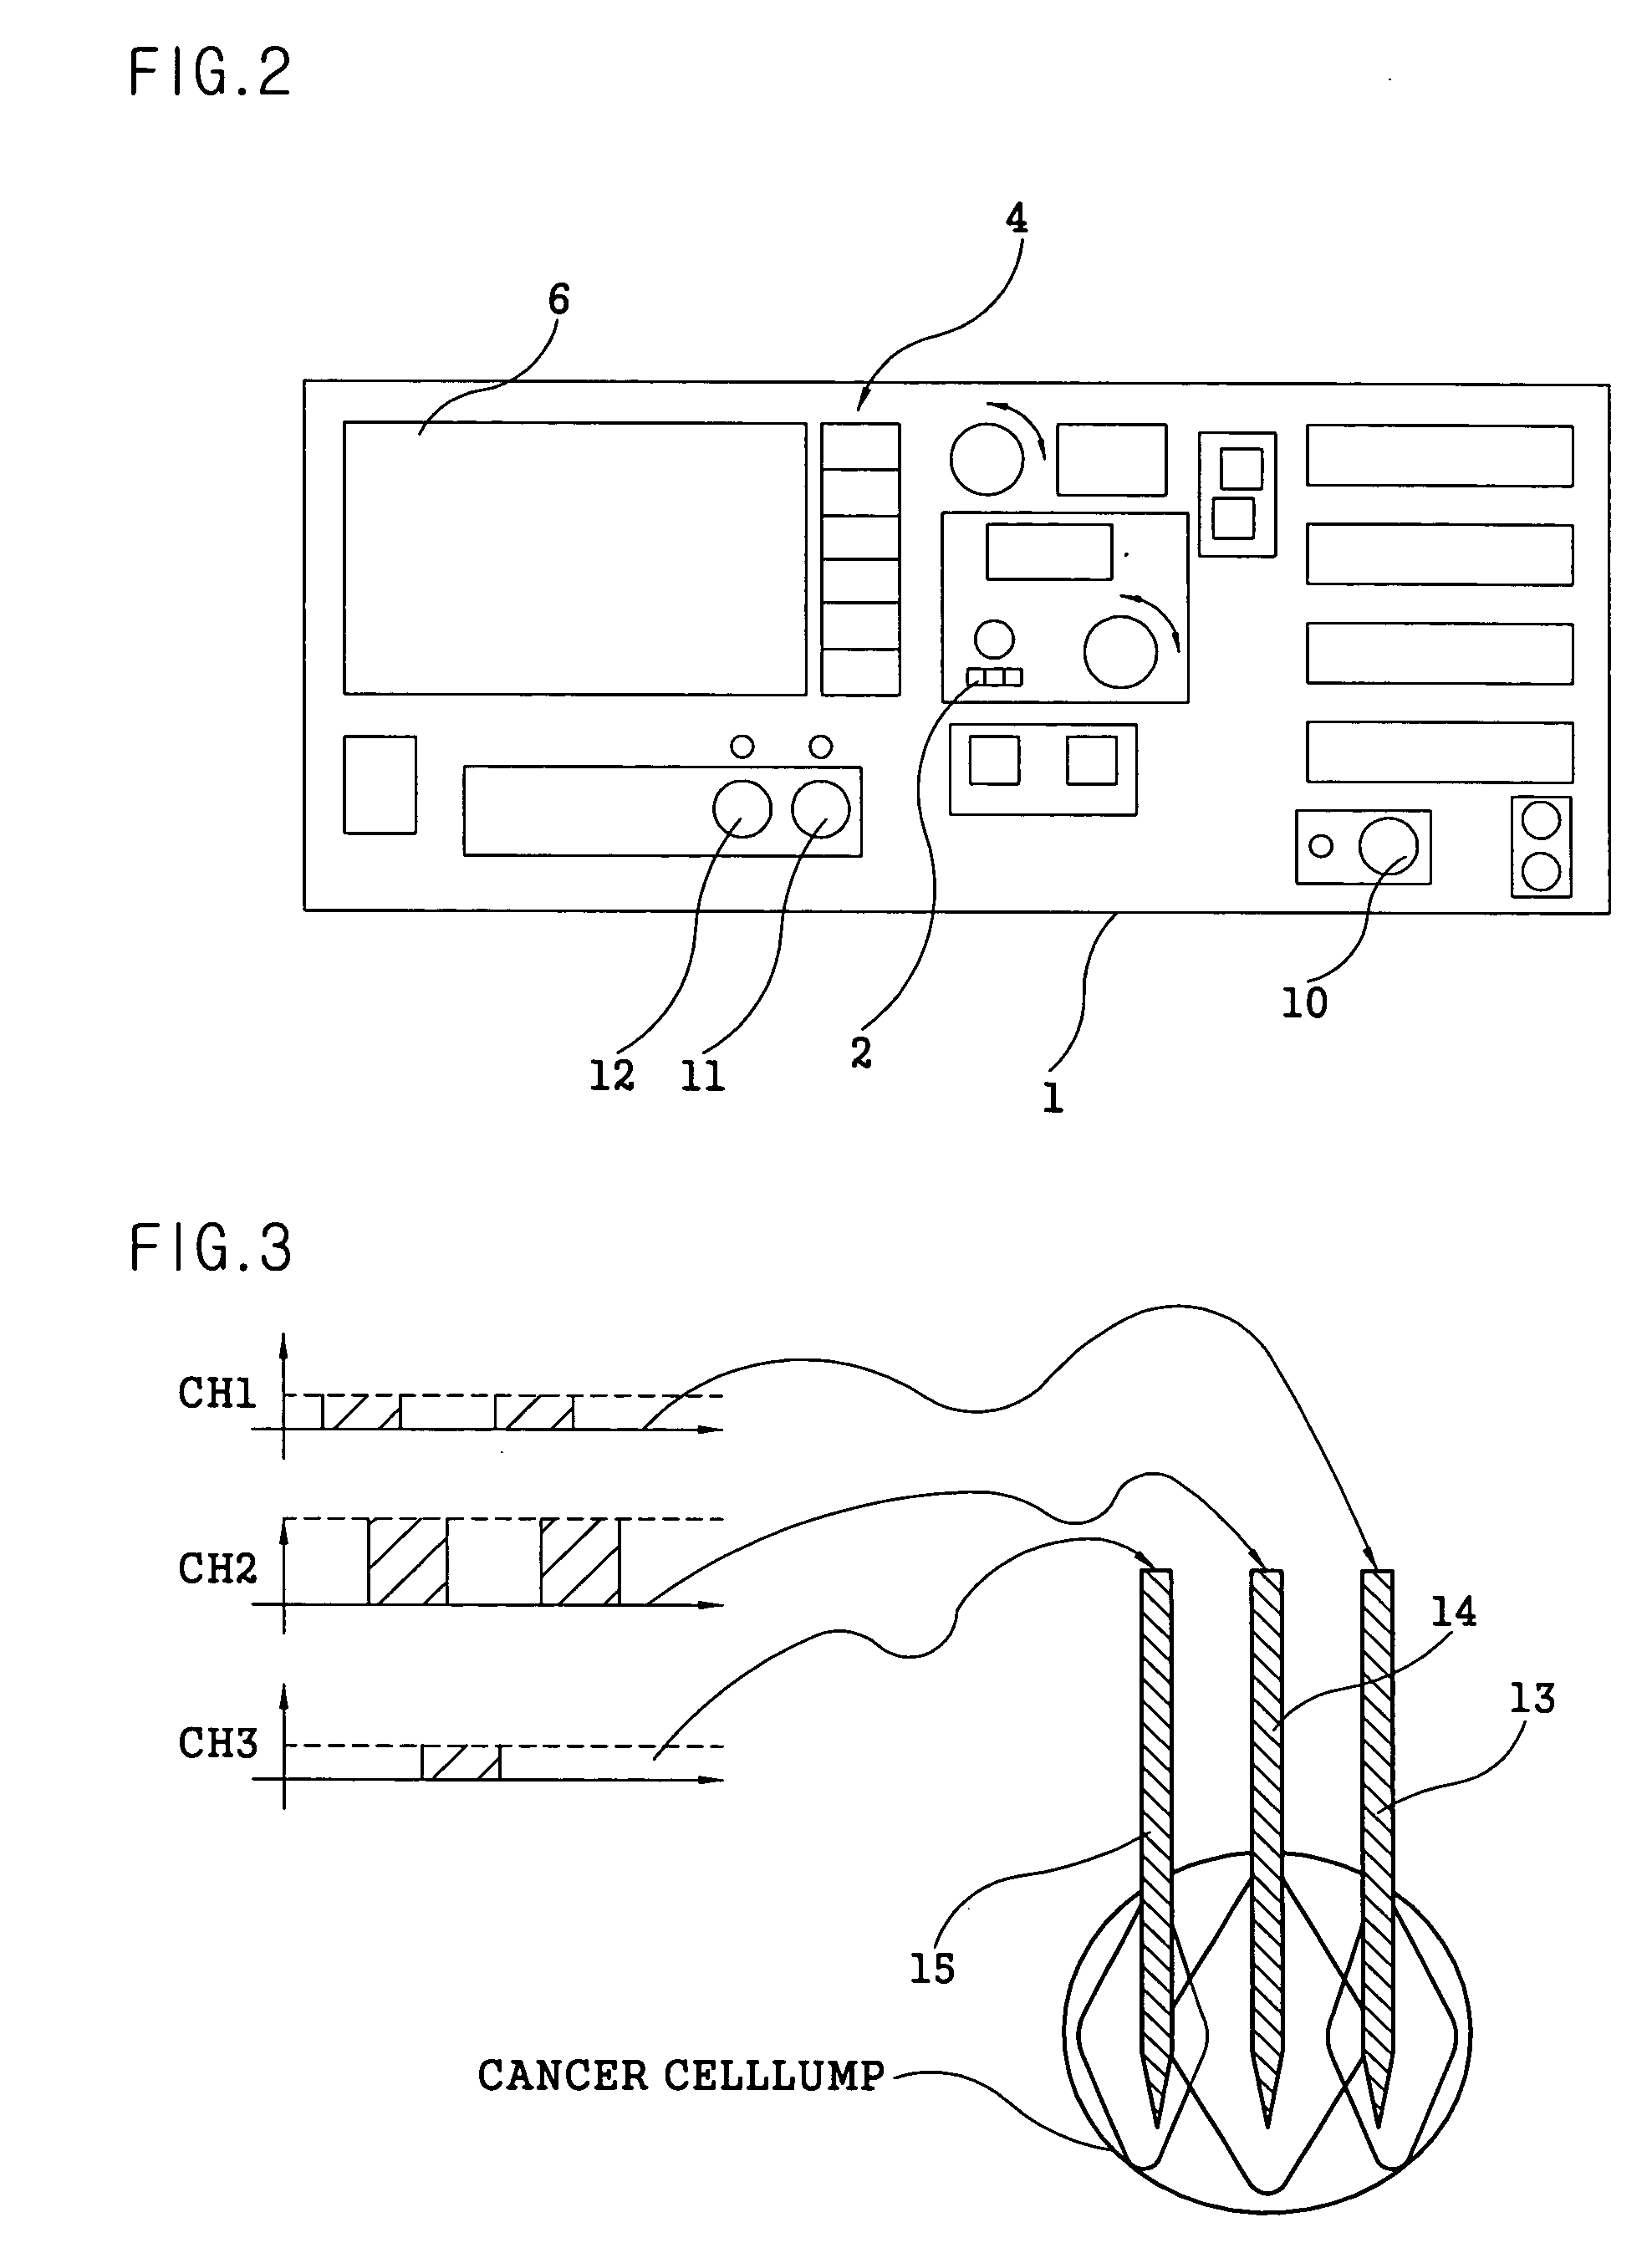 Multi-channel radio frequency generator for high-frequency thermal treatment